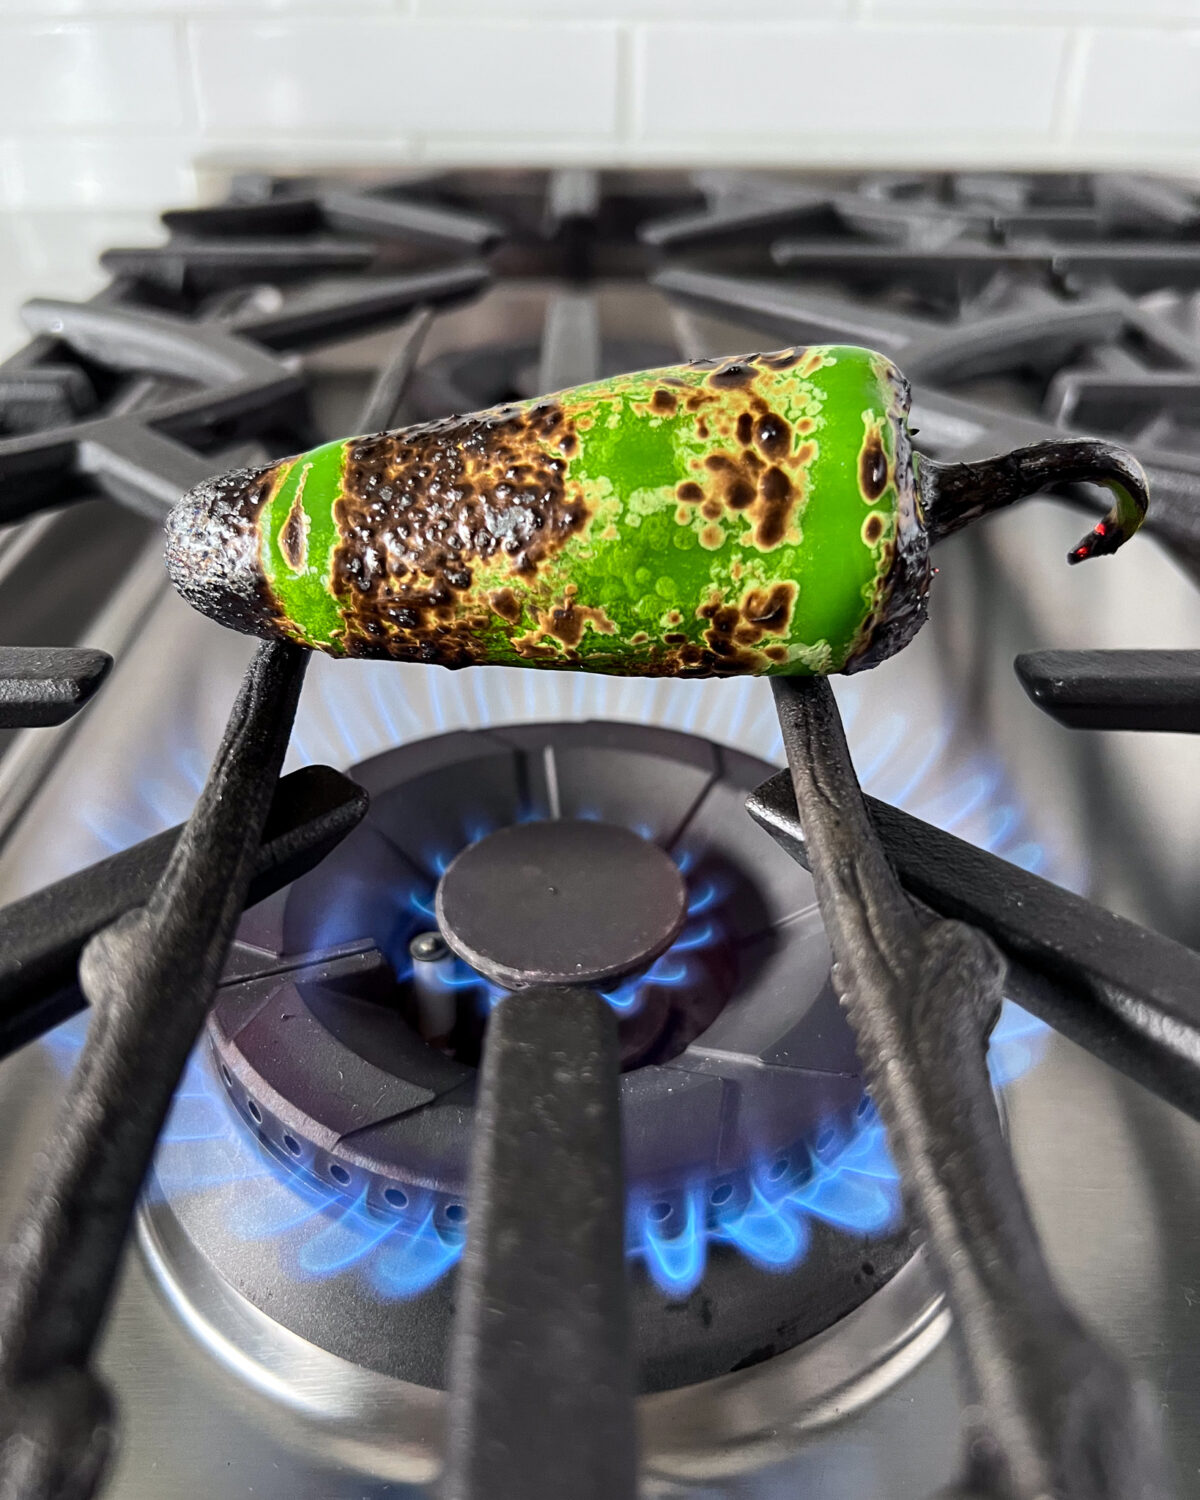 Char the jalapeño directly over a gas stove burner. I used a few cast iron skewers so that the pepper would fit. 